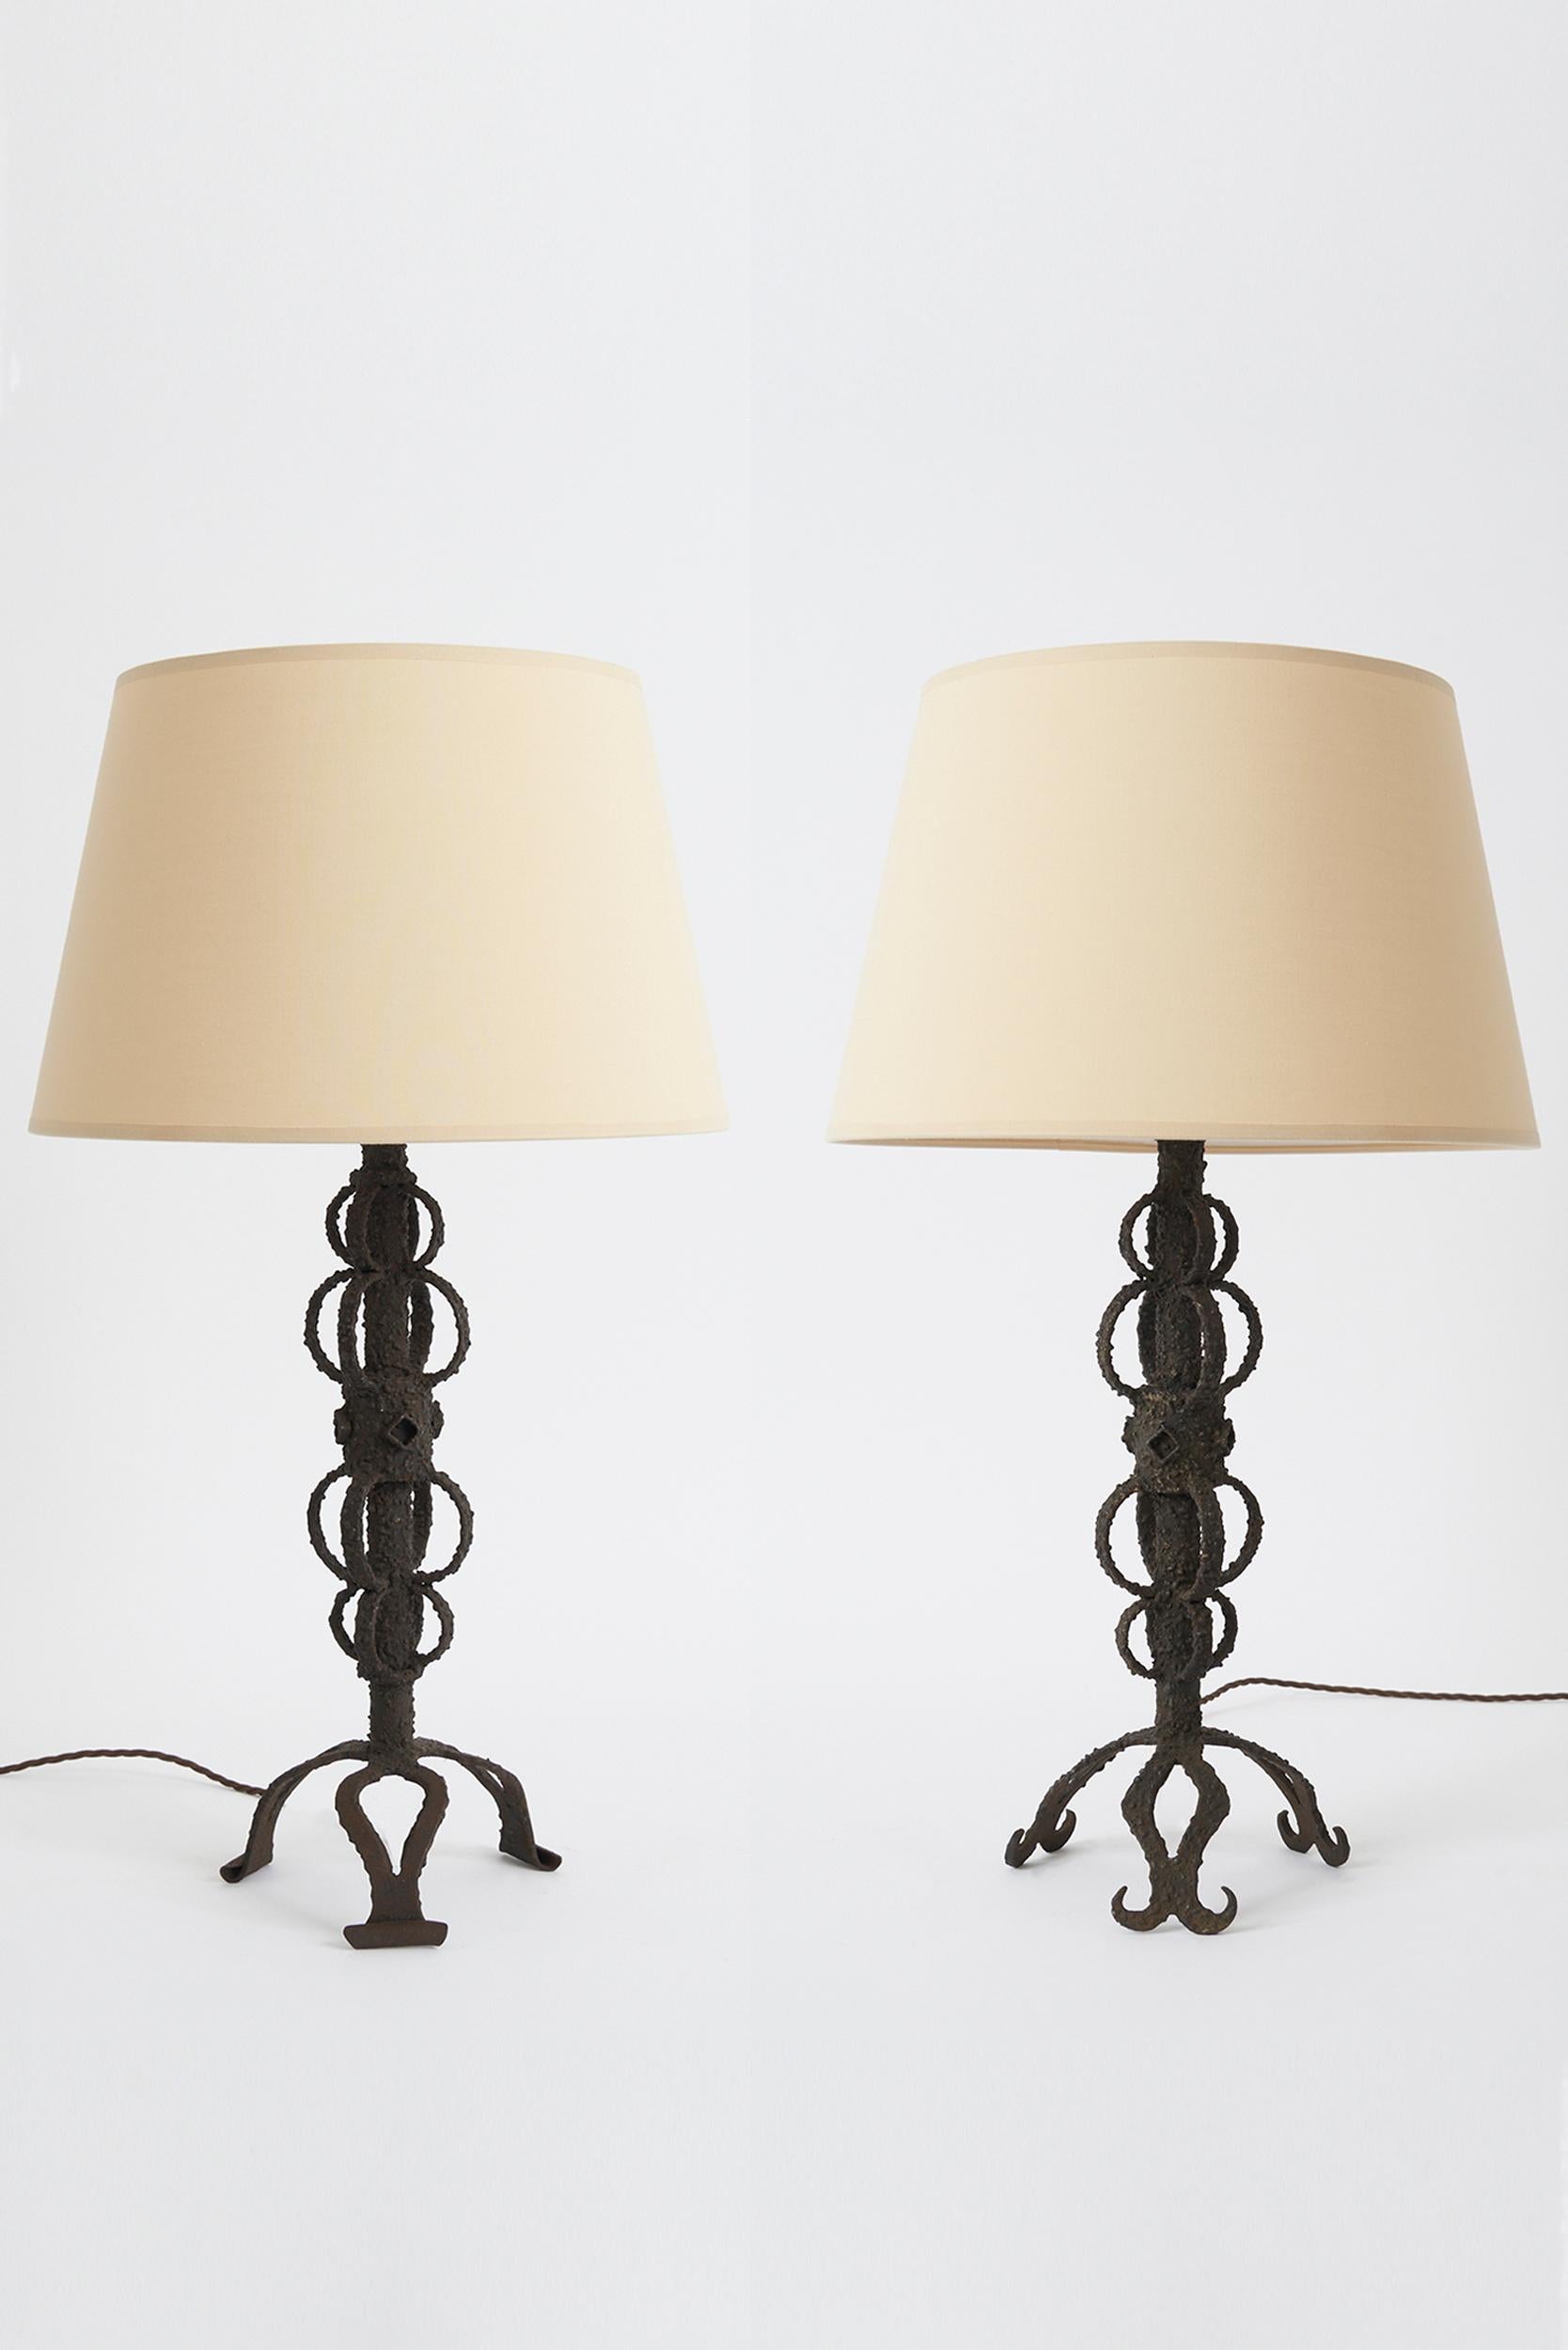 A pair of brutalist wrought iron table lamps.
Spain, mid 20th Century
With the shade: 66.5 cm high by 35.5 cm diameter
Lamp base only: 50 cm high by 21 cm diameter